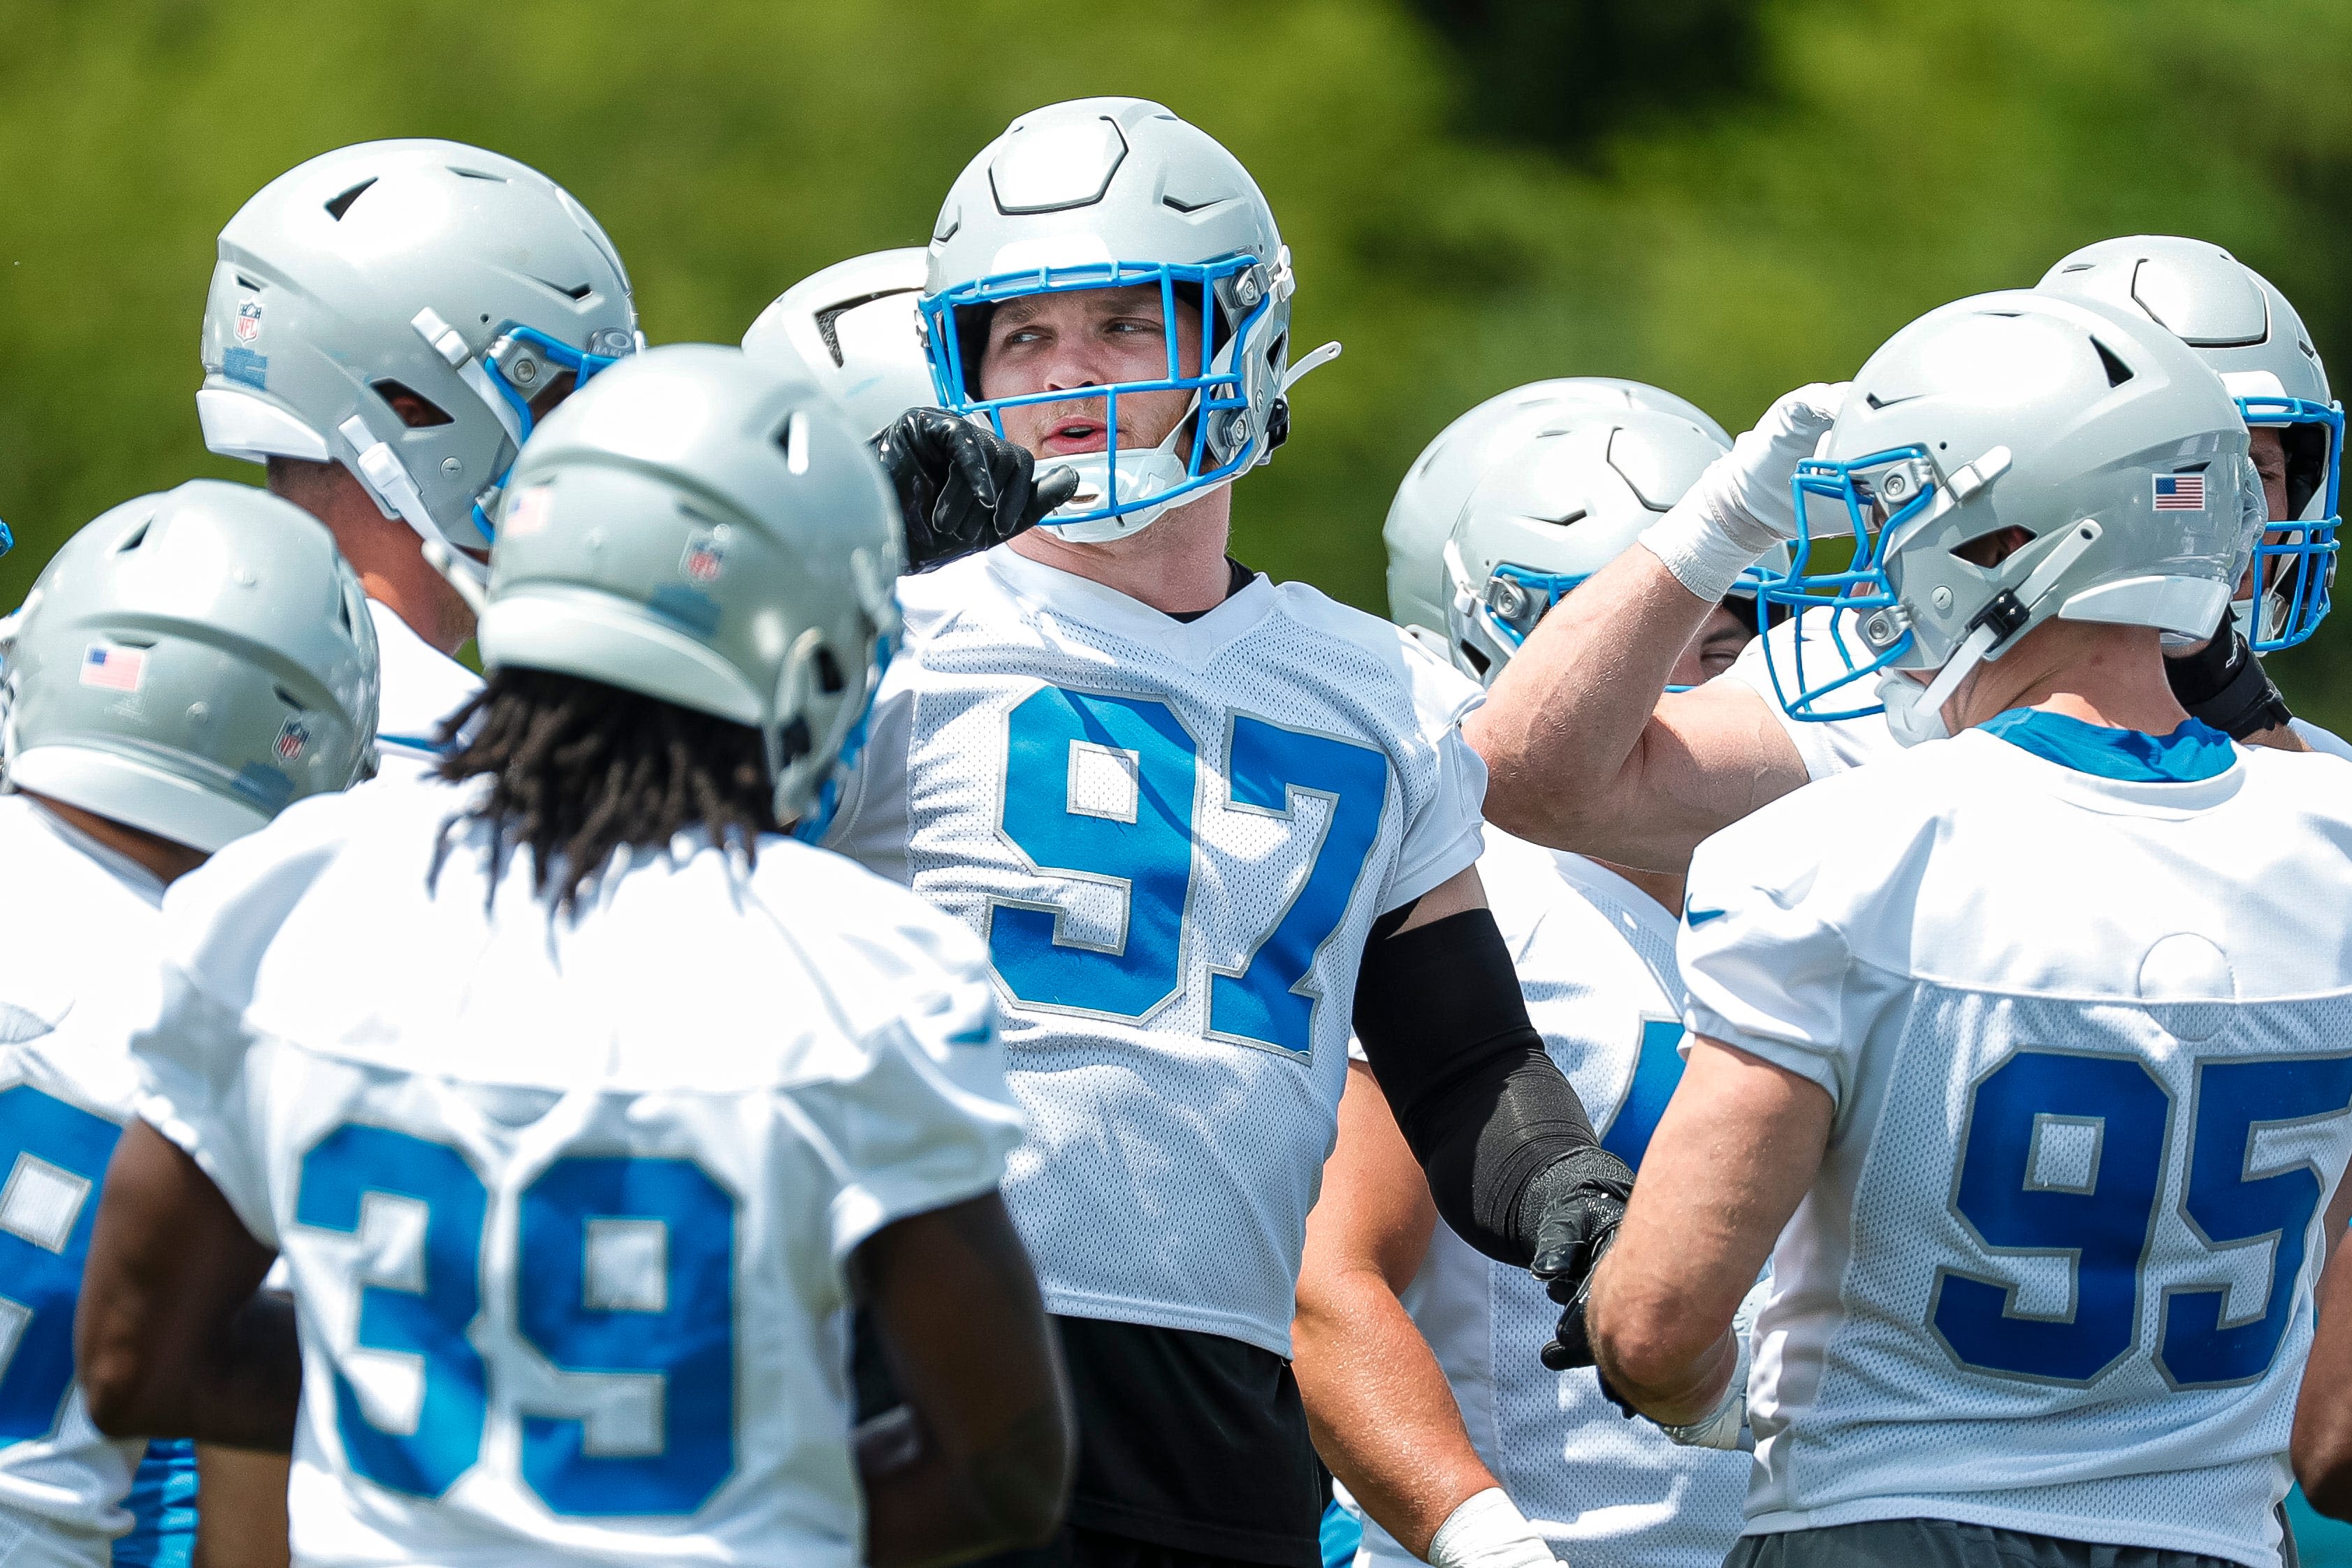 Detroit Lions lose an OTA practice for violating offseason player work rules